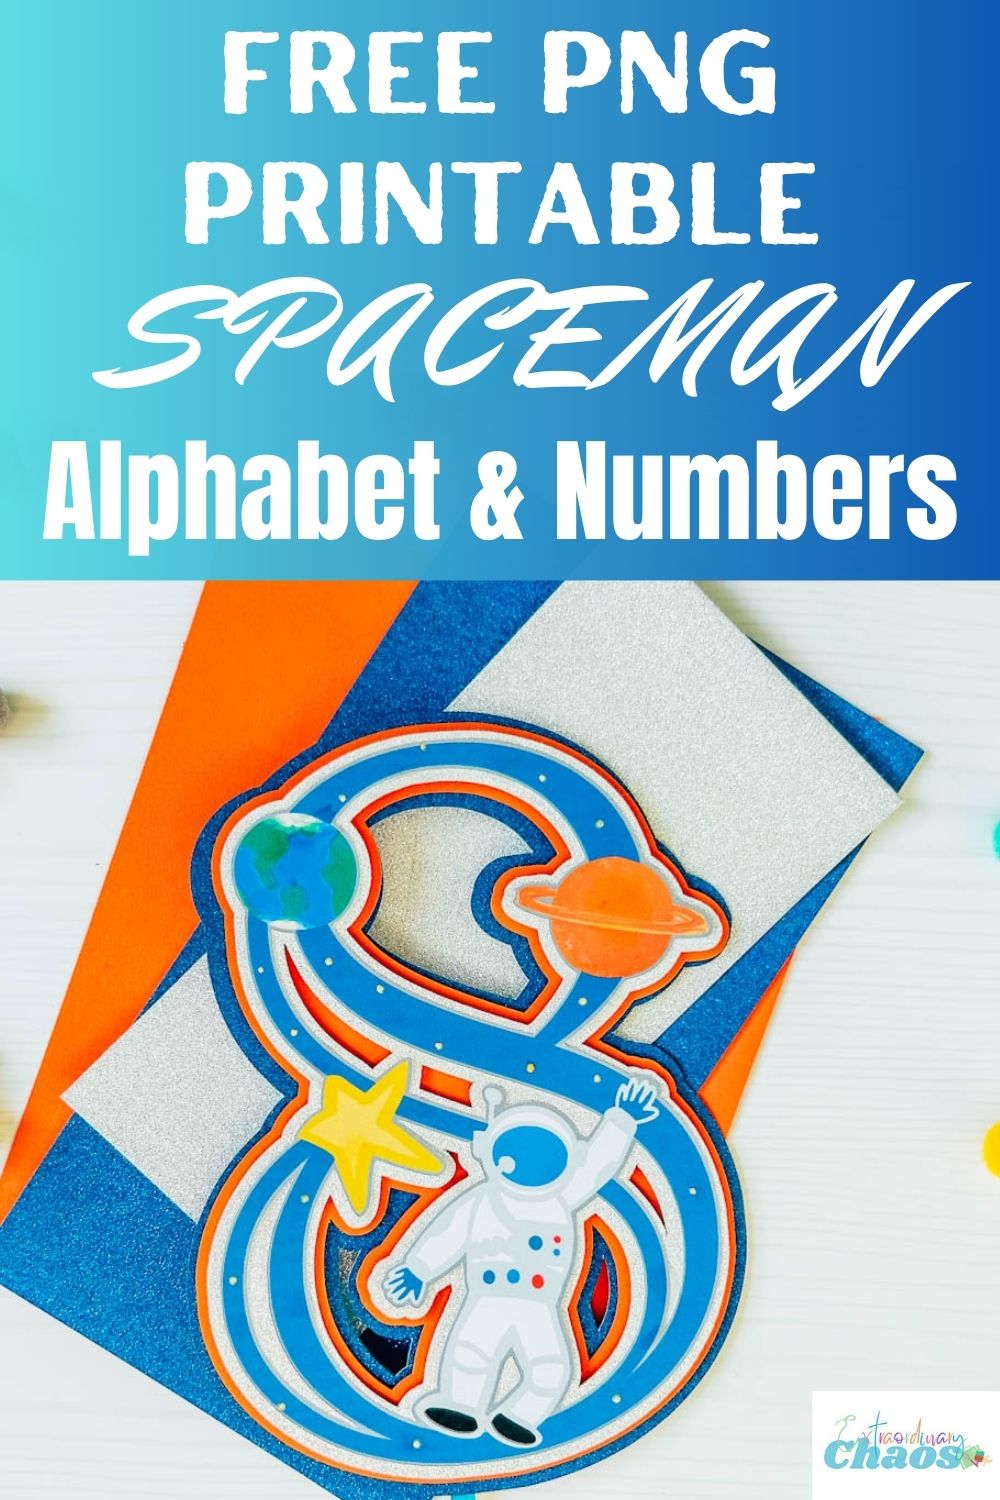 Free printable spaceman alphabet letters and numbers for Cricut and Silhouette